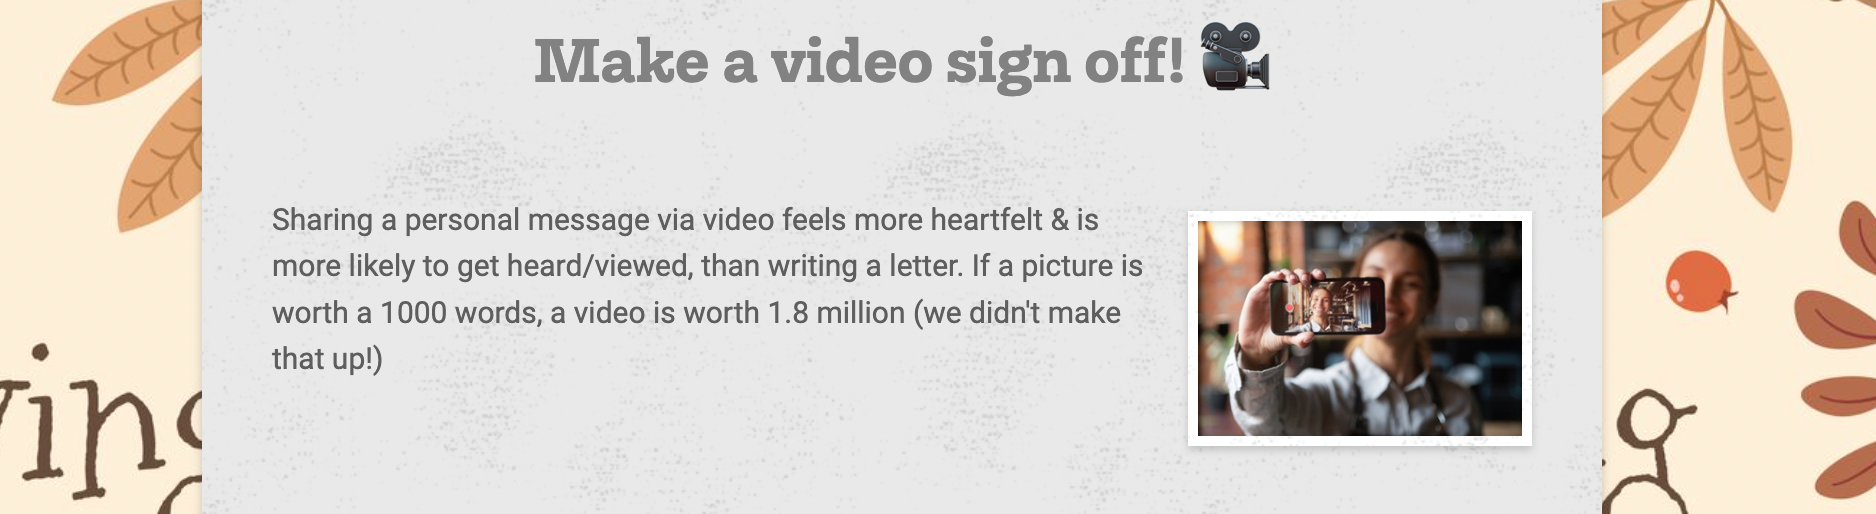 screen shot of a slice of a Thanksgiving Newsletter suggesting a video sign off